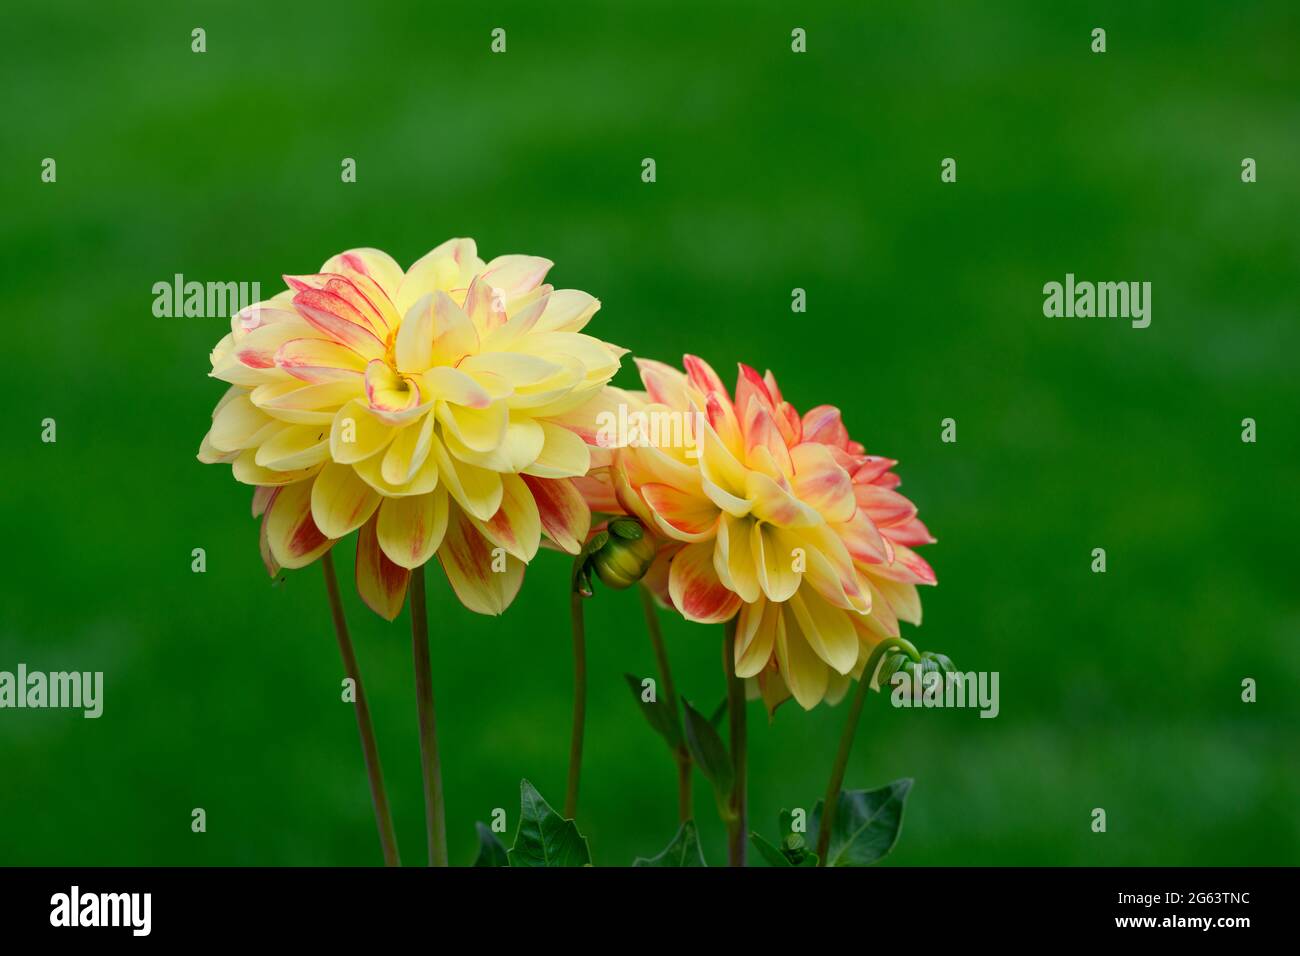 Yellow and pink dahlia flowers set against an out of focus grass background Stock Photo